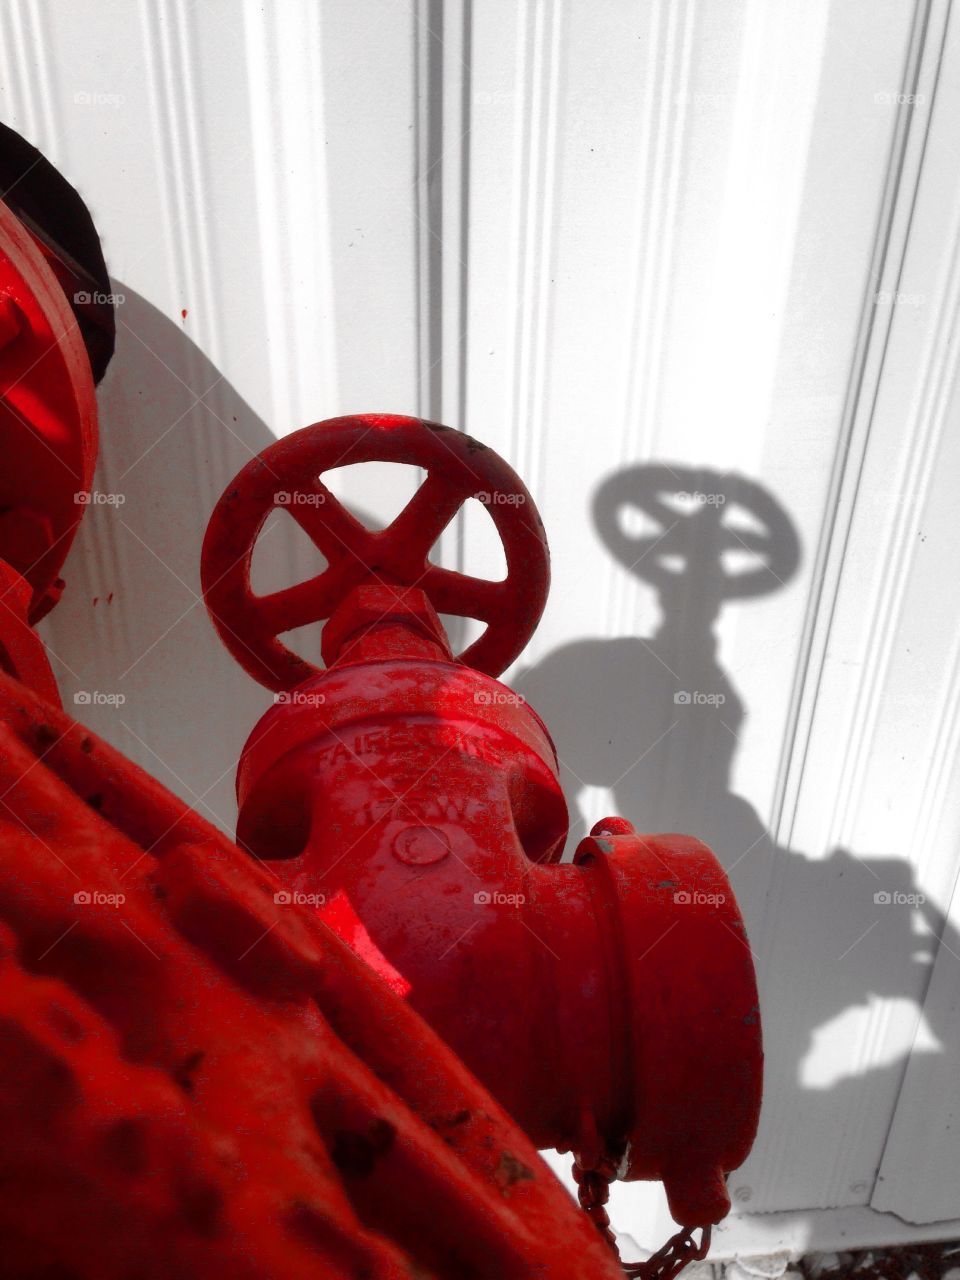 Close-up of a red valves